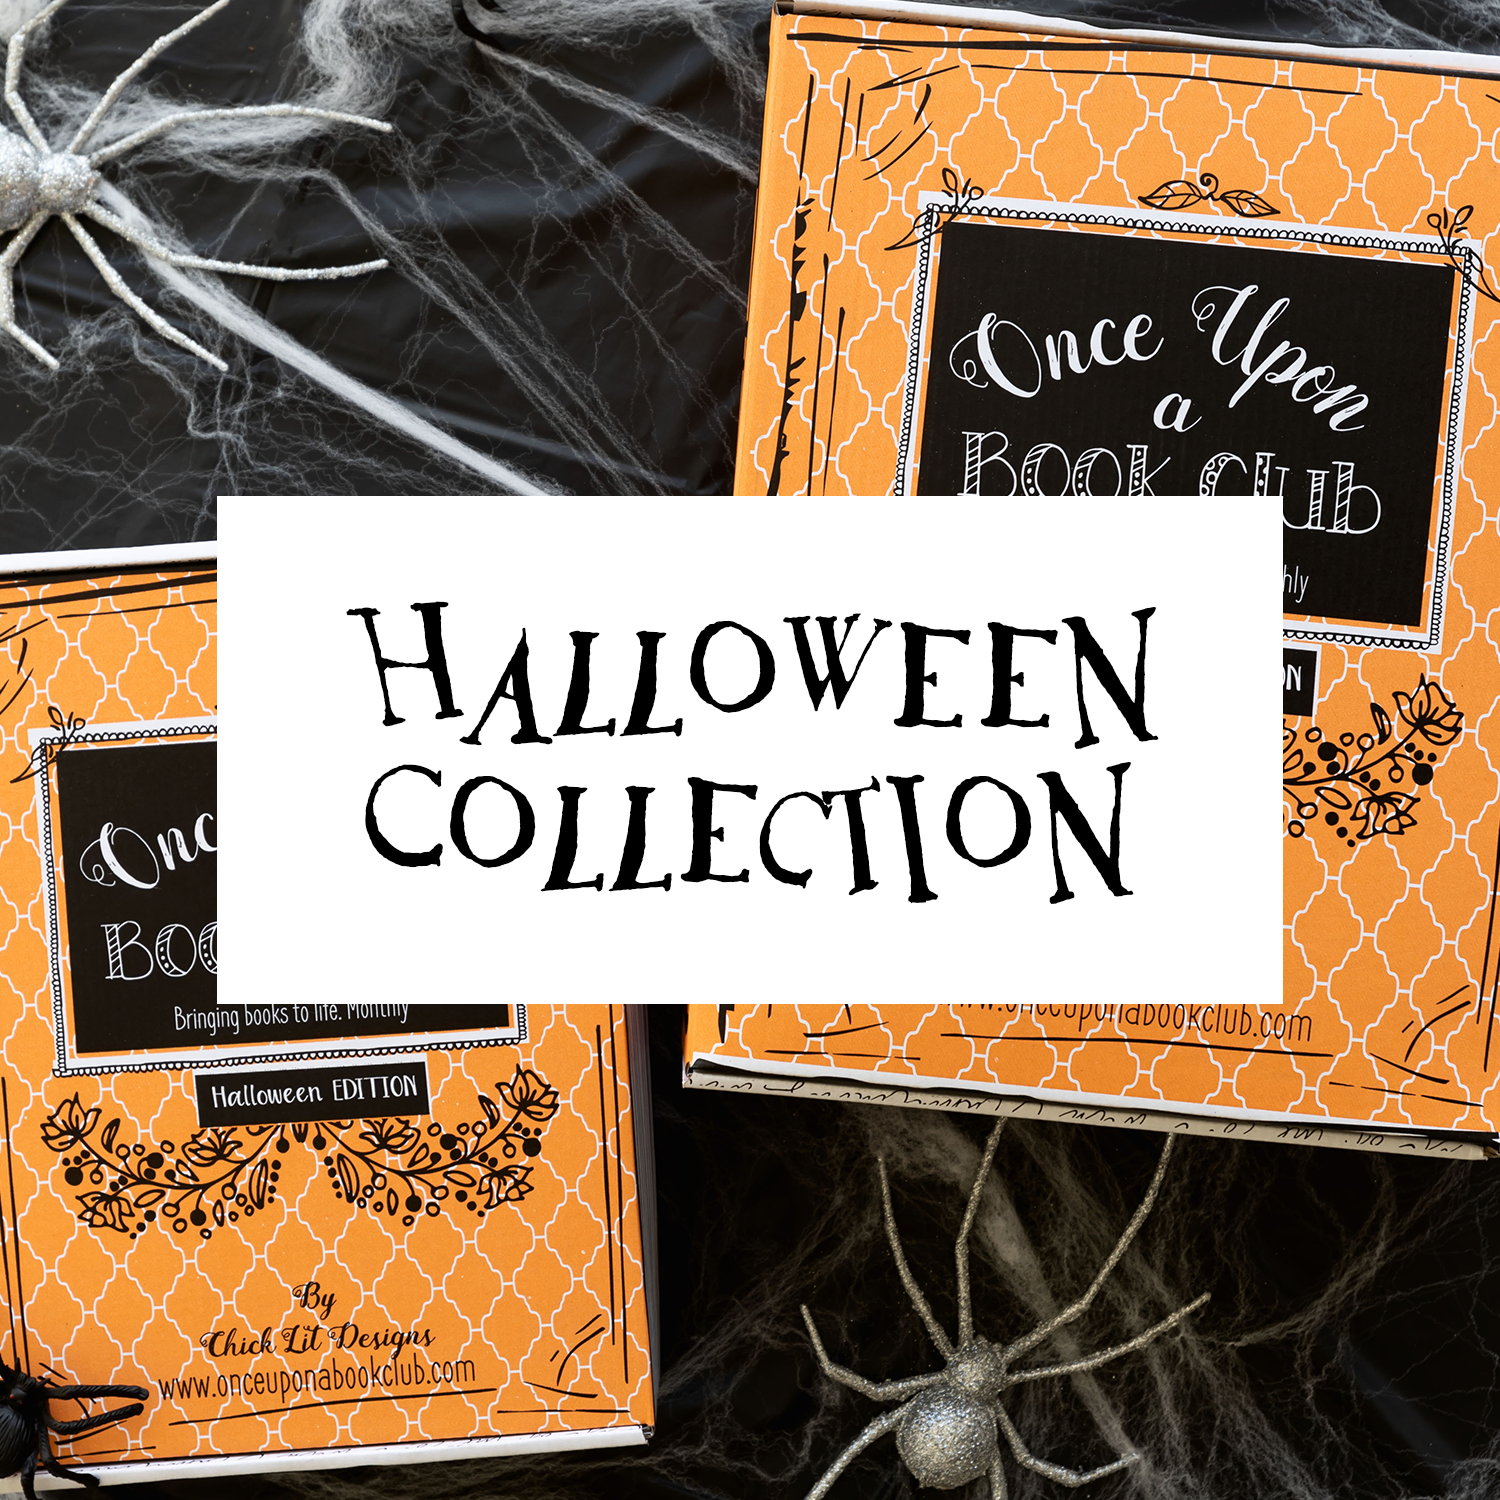 "Halloween Collection" is centered over a background of orange boxes and fake spiders